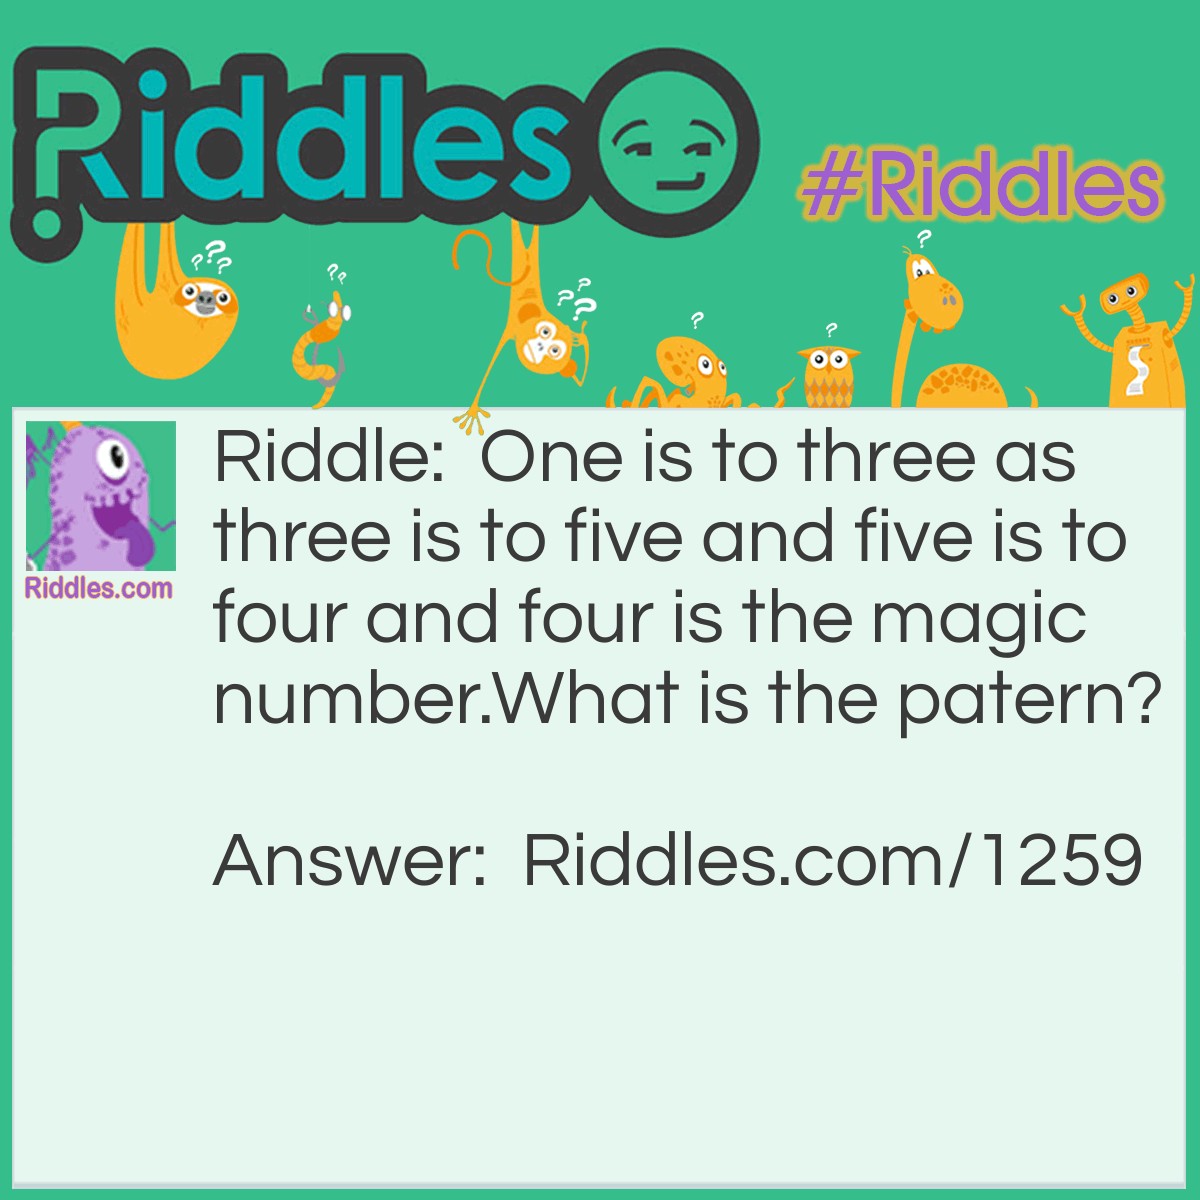 Riddle: One is to three as three is to five and five is to four and four is the magic number.
What is the pattern? Answer: One has three letters in the word three has five letters in it five has four letters and four has four letters in it (if you try more numbers they will always come back to the number four: so four is the magic number)